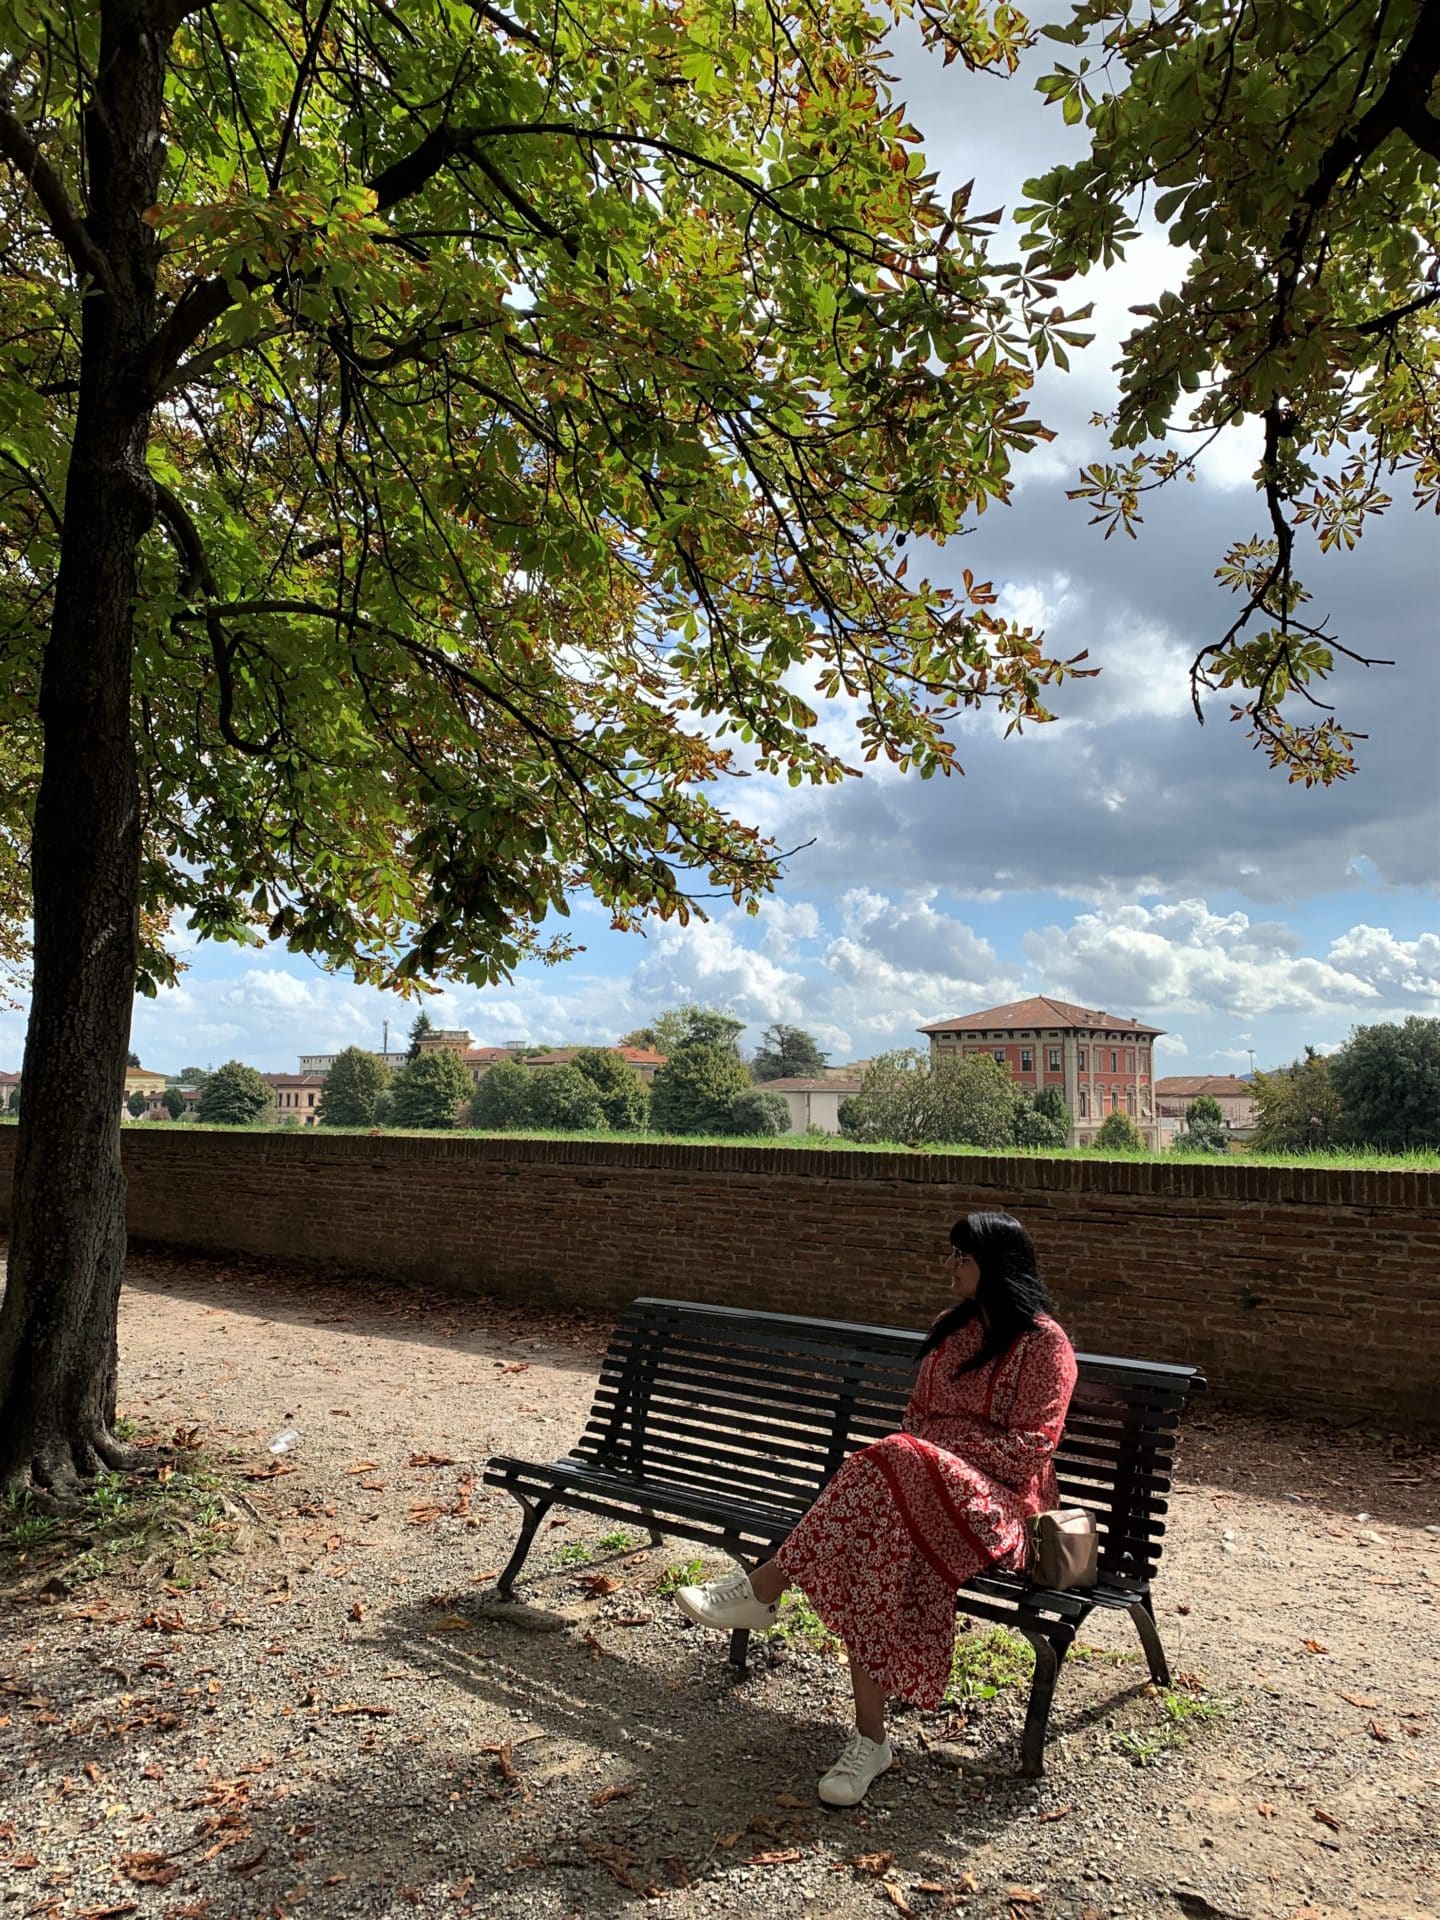 Bejal sitting on bench along city walls, Lucca